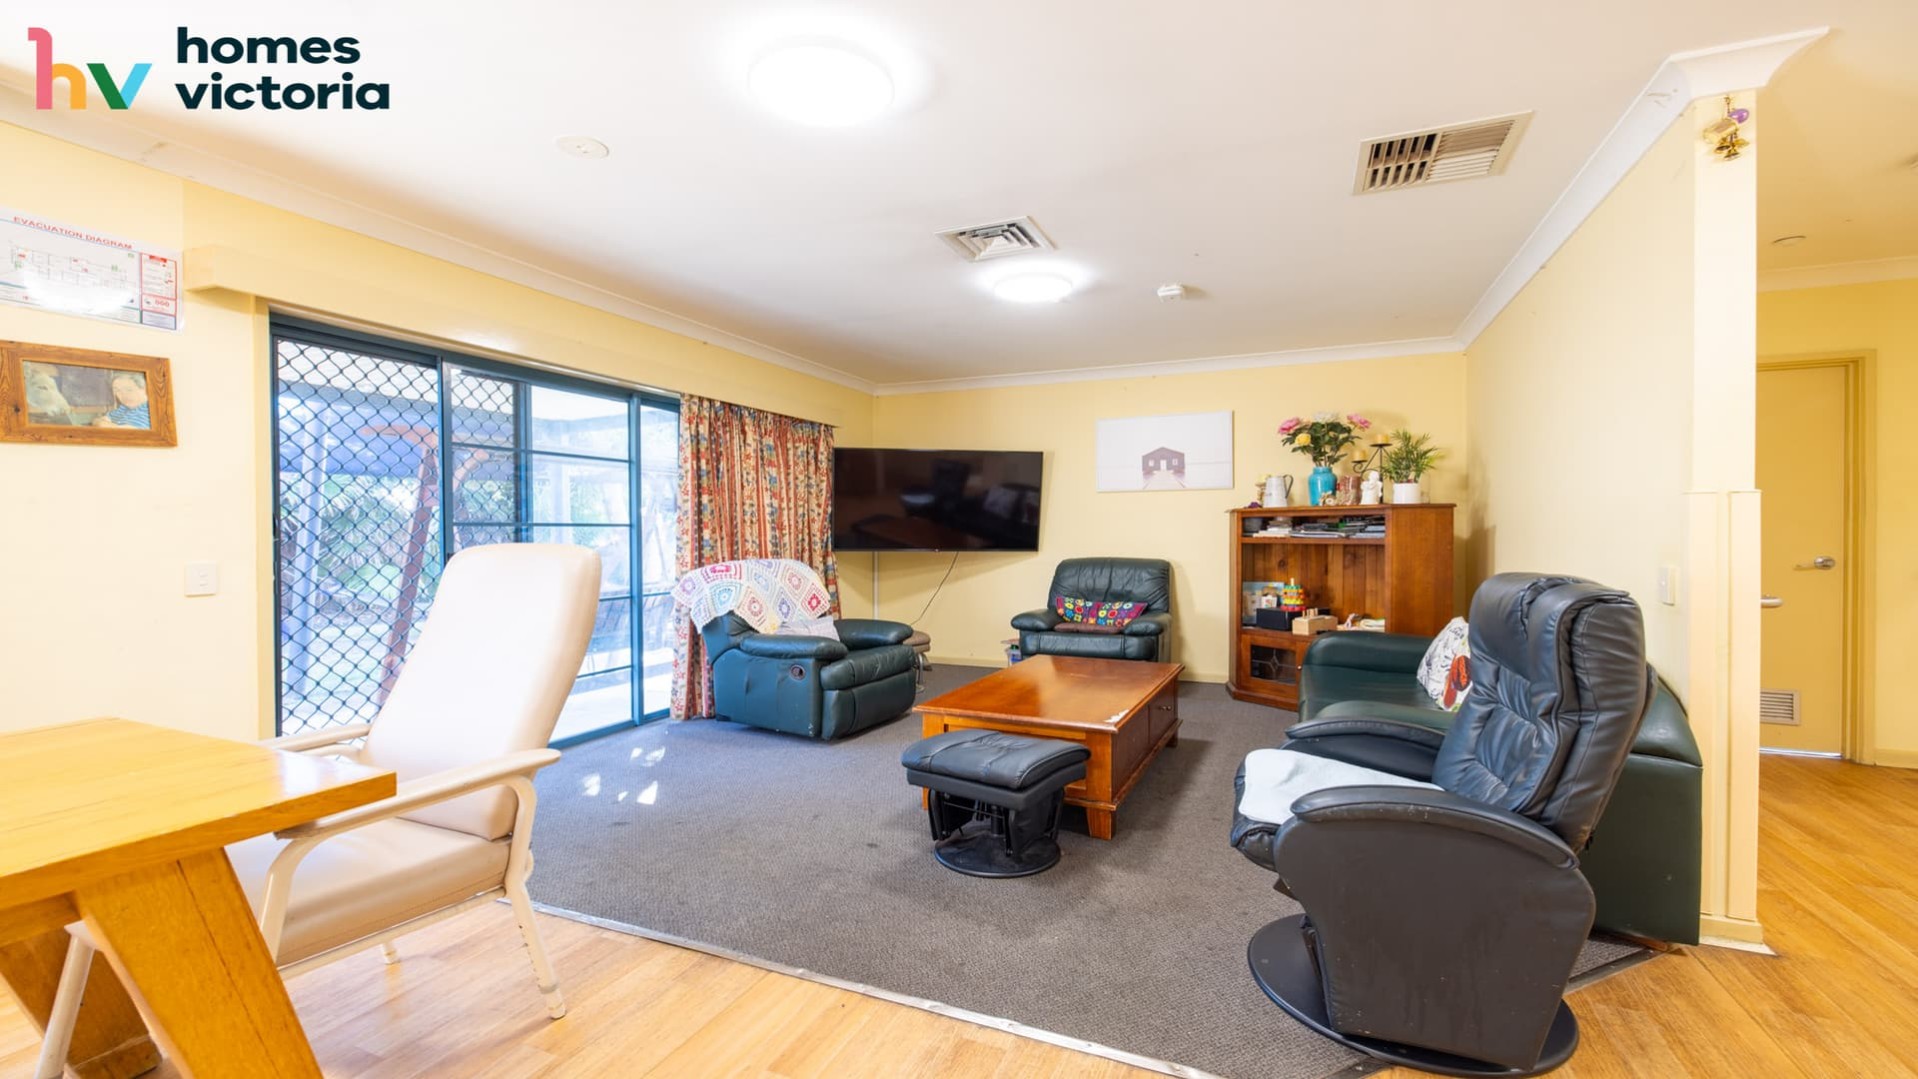 Spacious loungeroom with easy chairs and couch on grey carpet facing wall mounted TV.  Room has sliding door to access backyard.